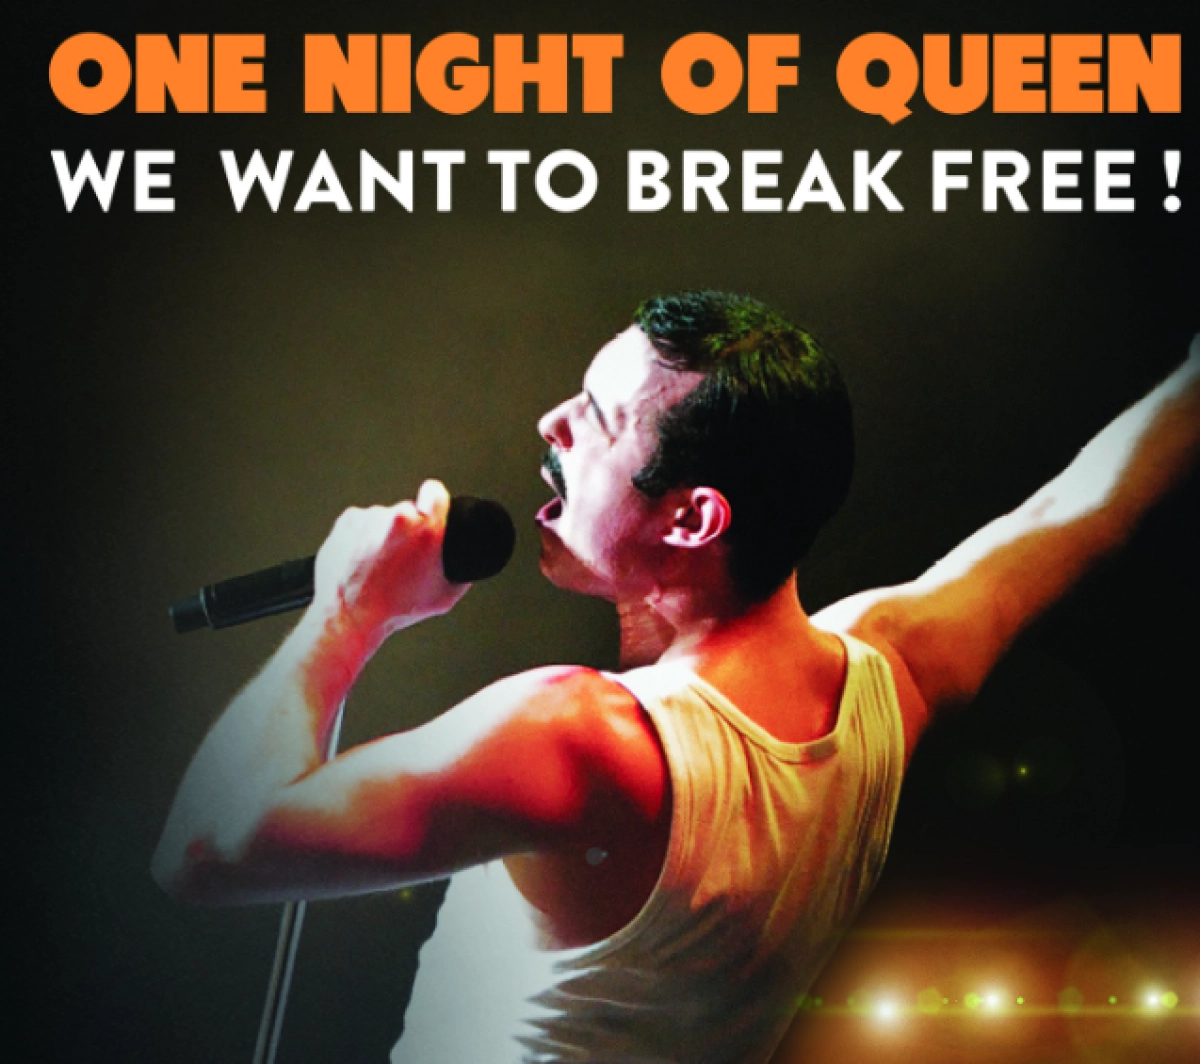 One Night of Queen at Arena Grand Paris Tickets